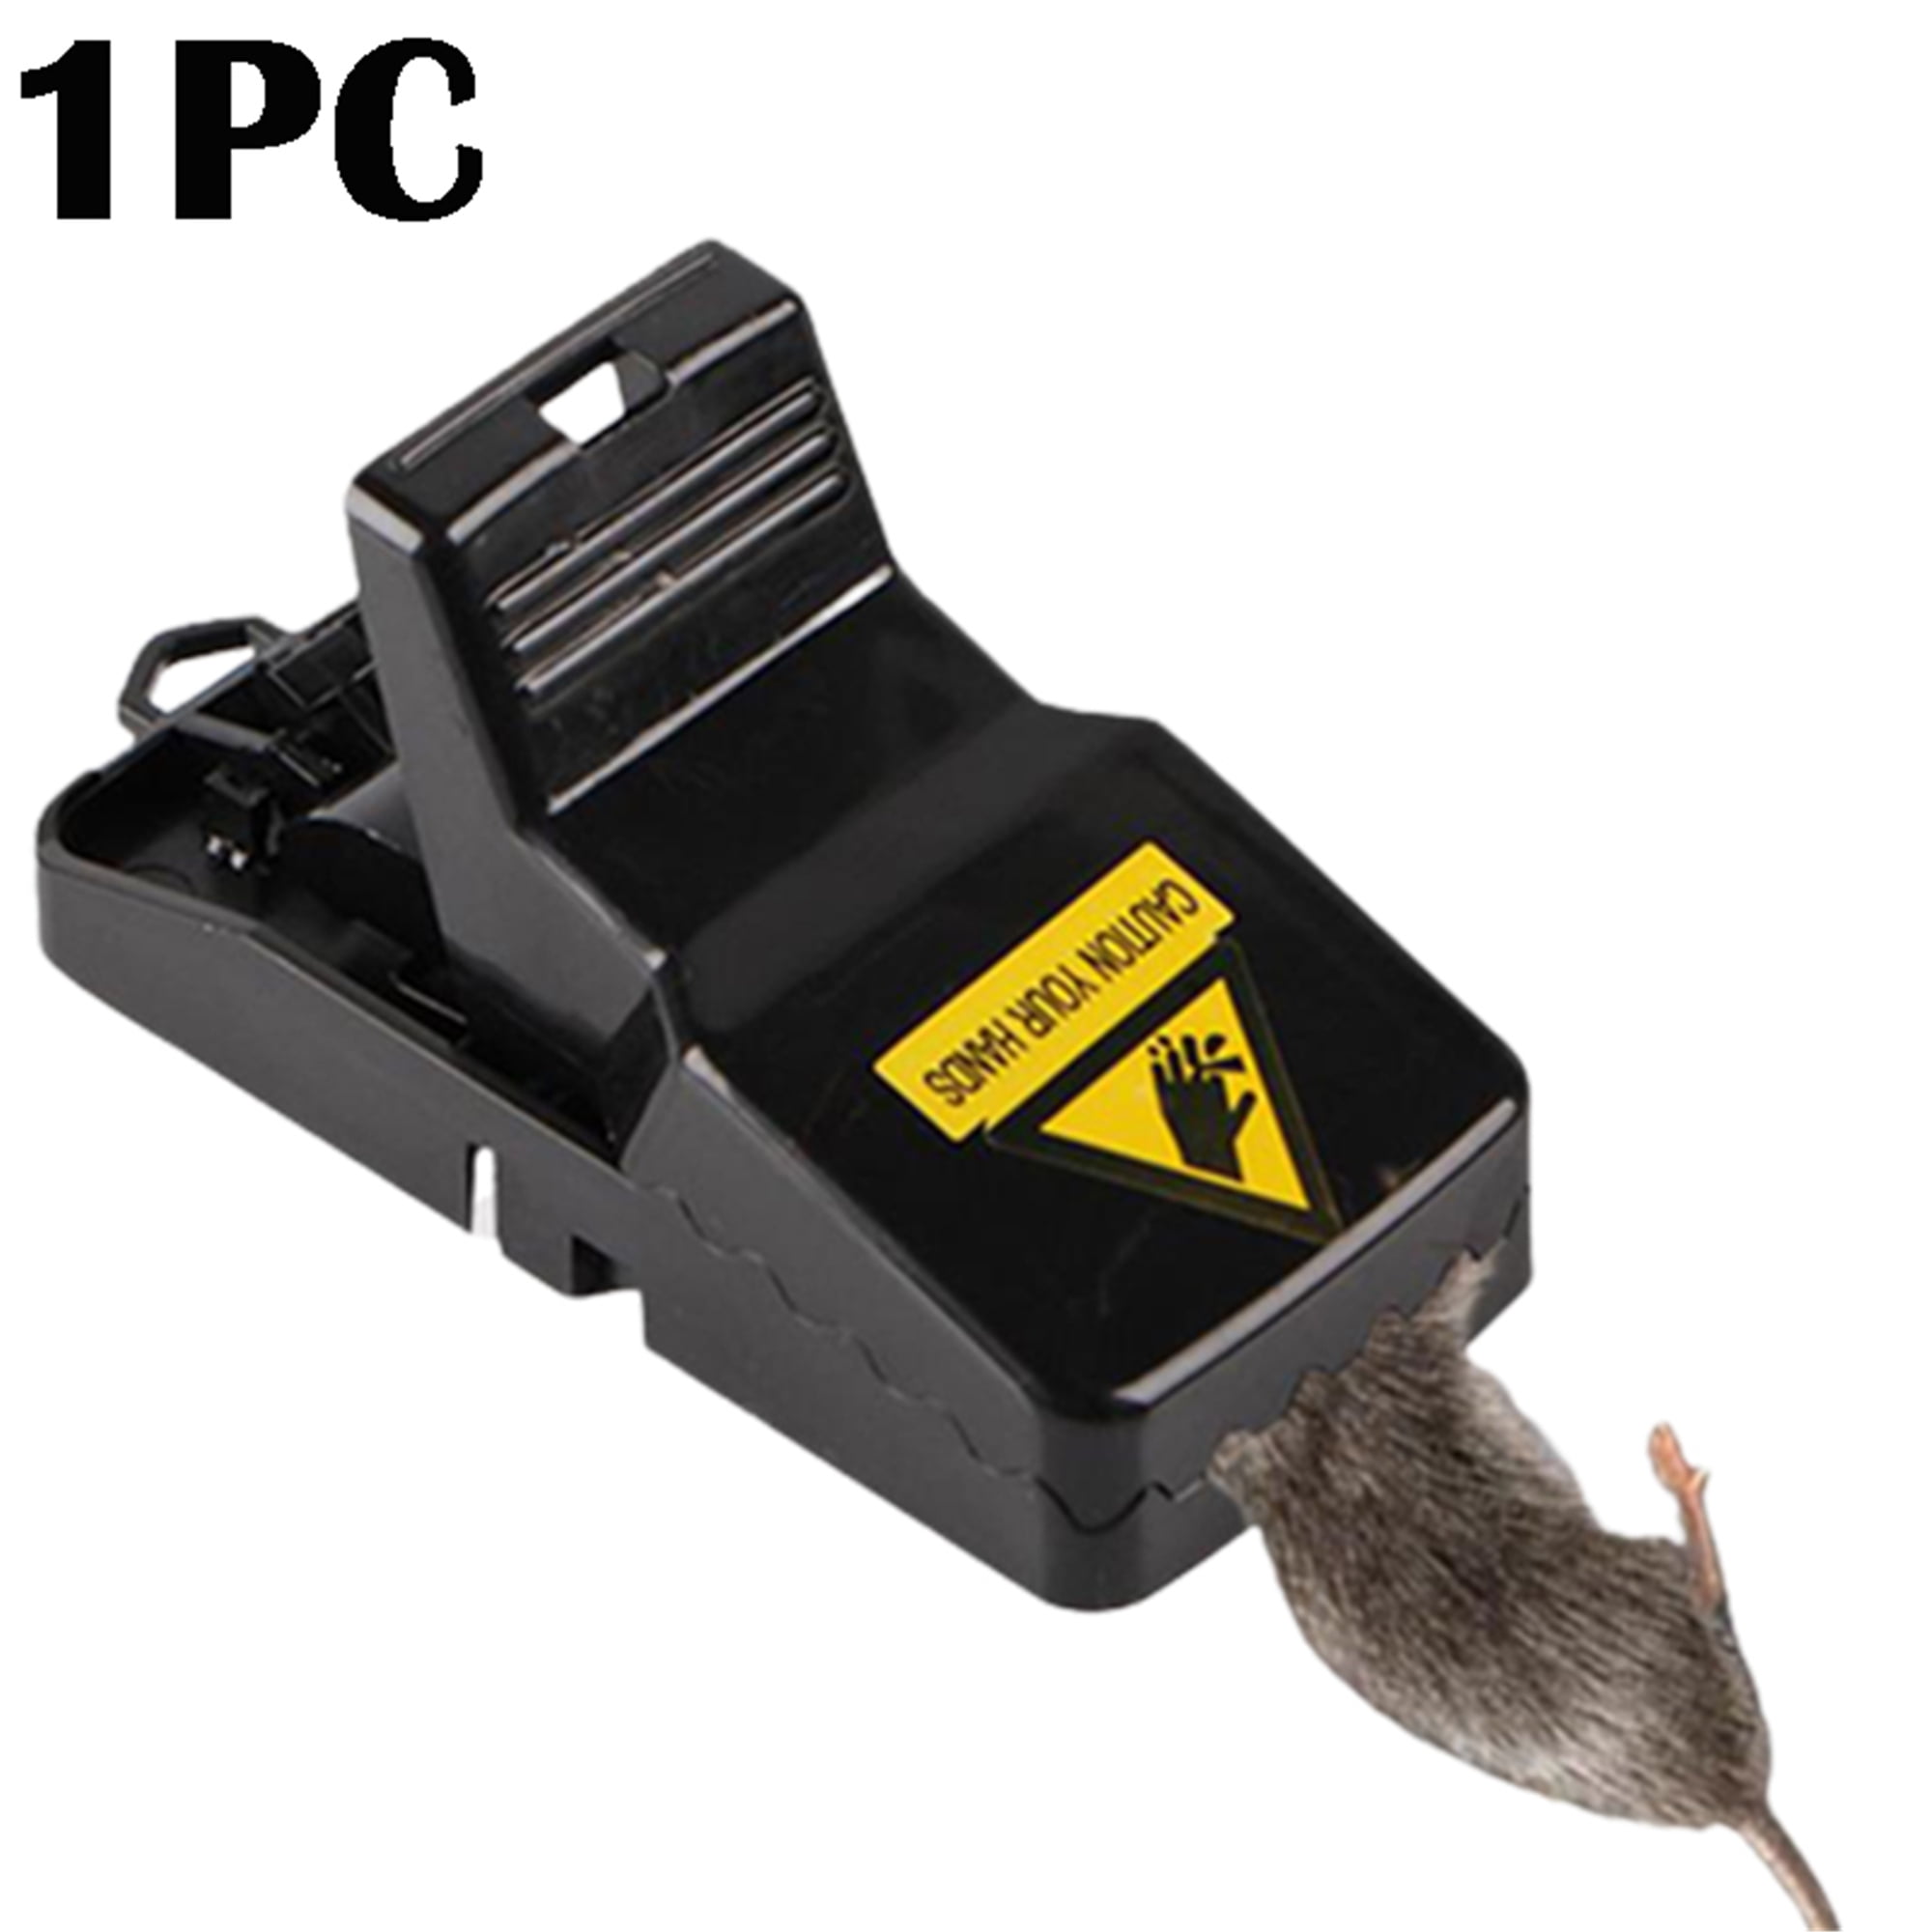 Mouse Traps Outdoor - Elbourn Mice Killer for House Indoor Outside Rats - 6 Pack, Size: 11.2x4.8x5.6 cm, Black